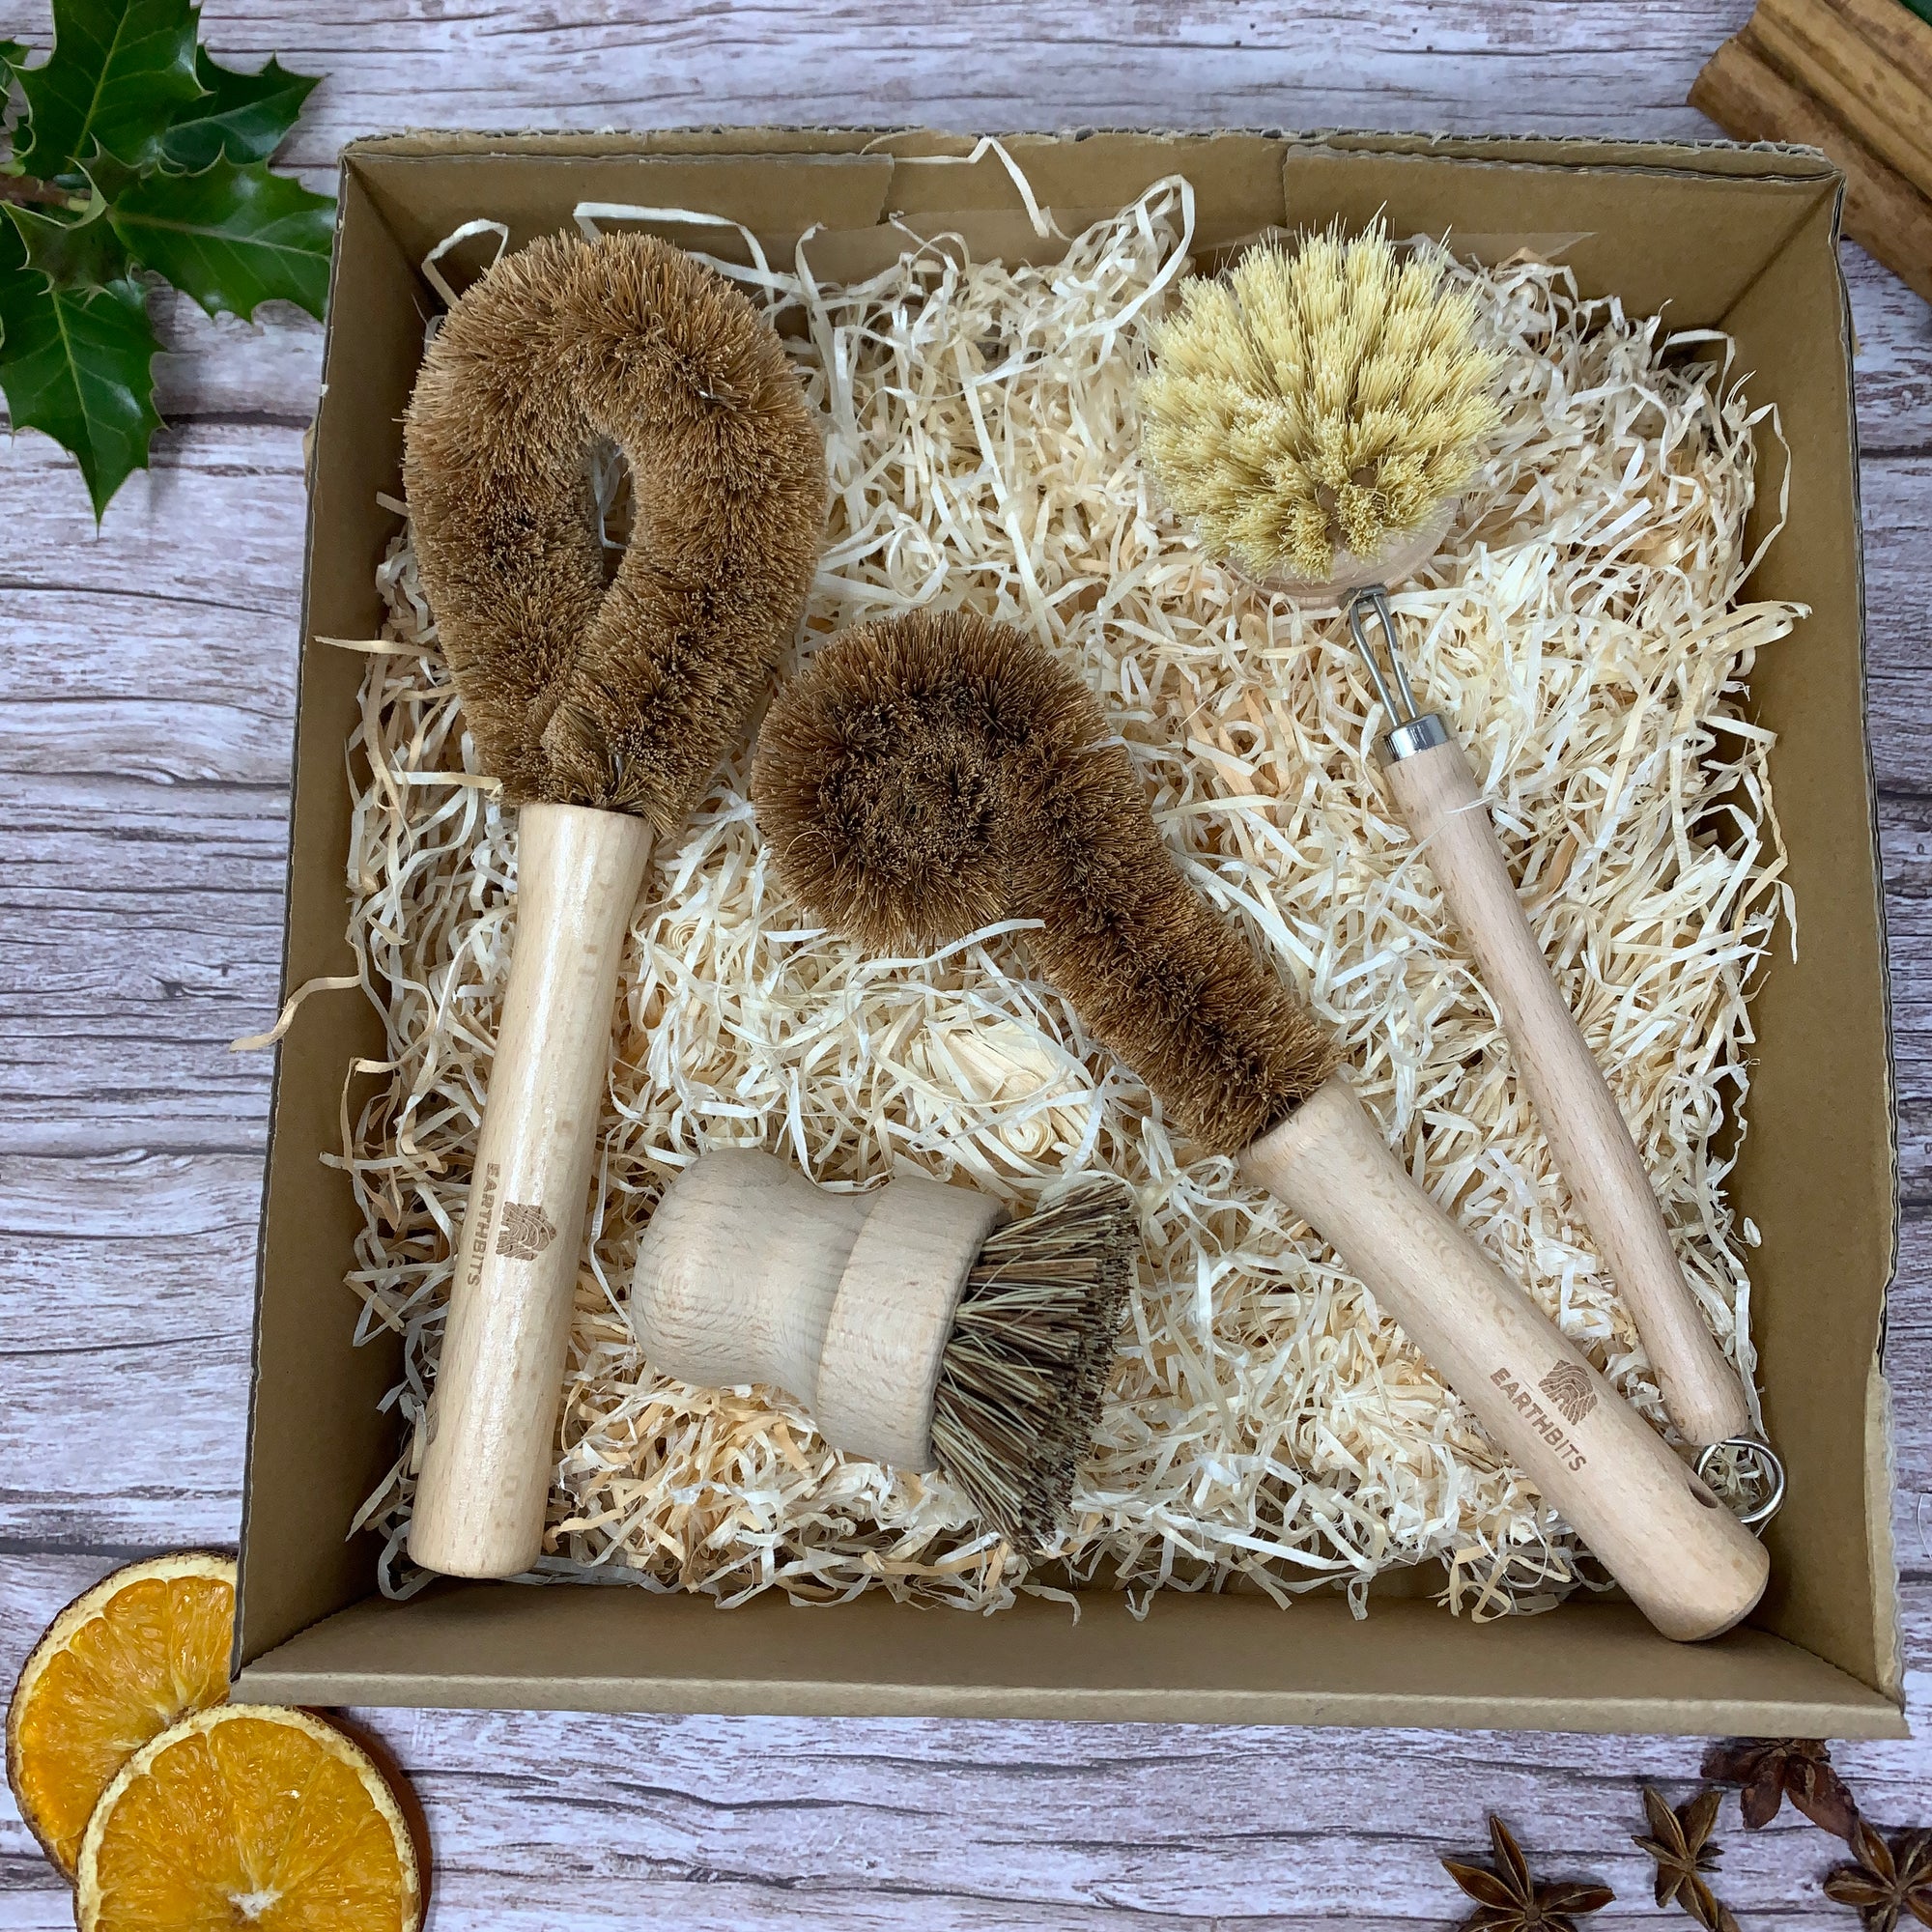 Biodegradable cleaning brushes set